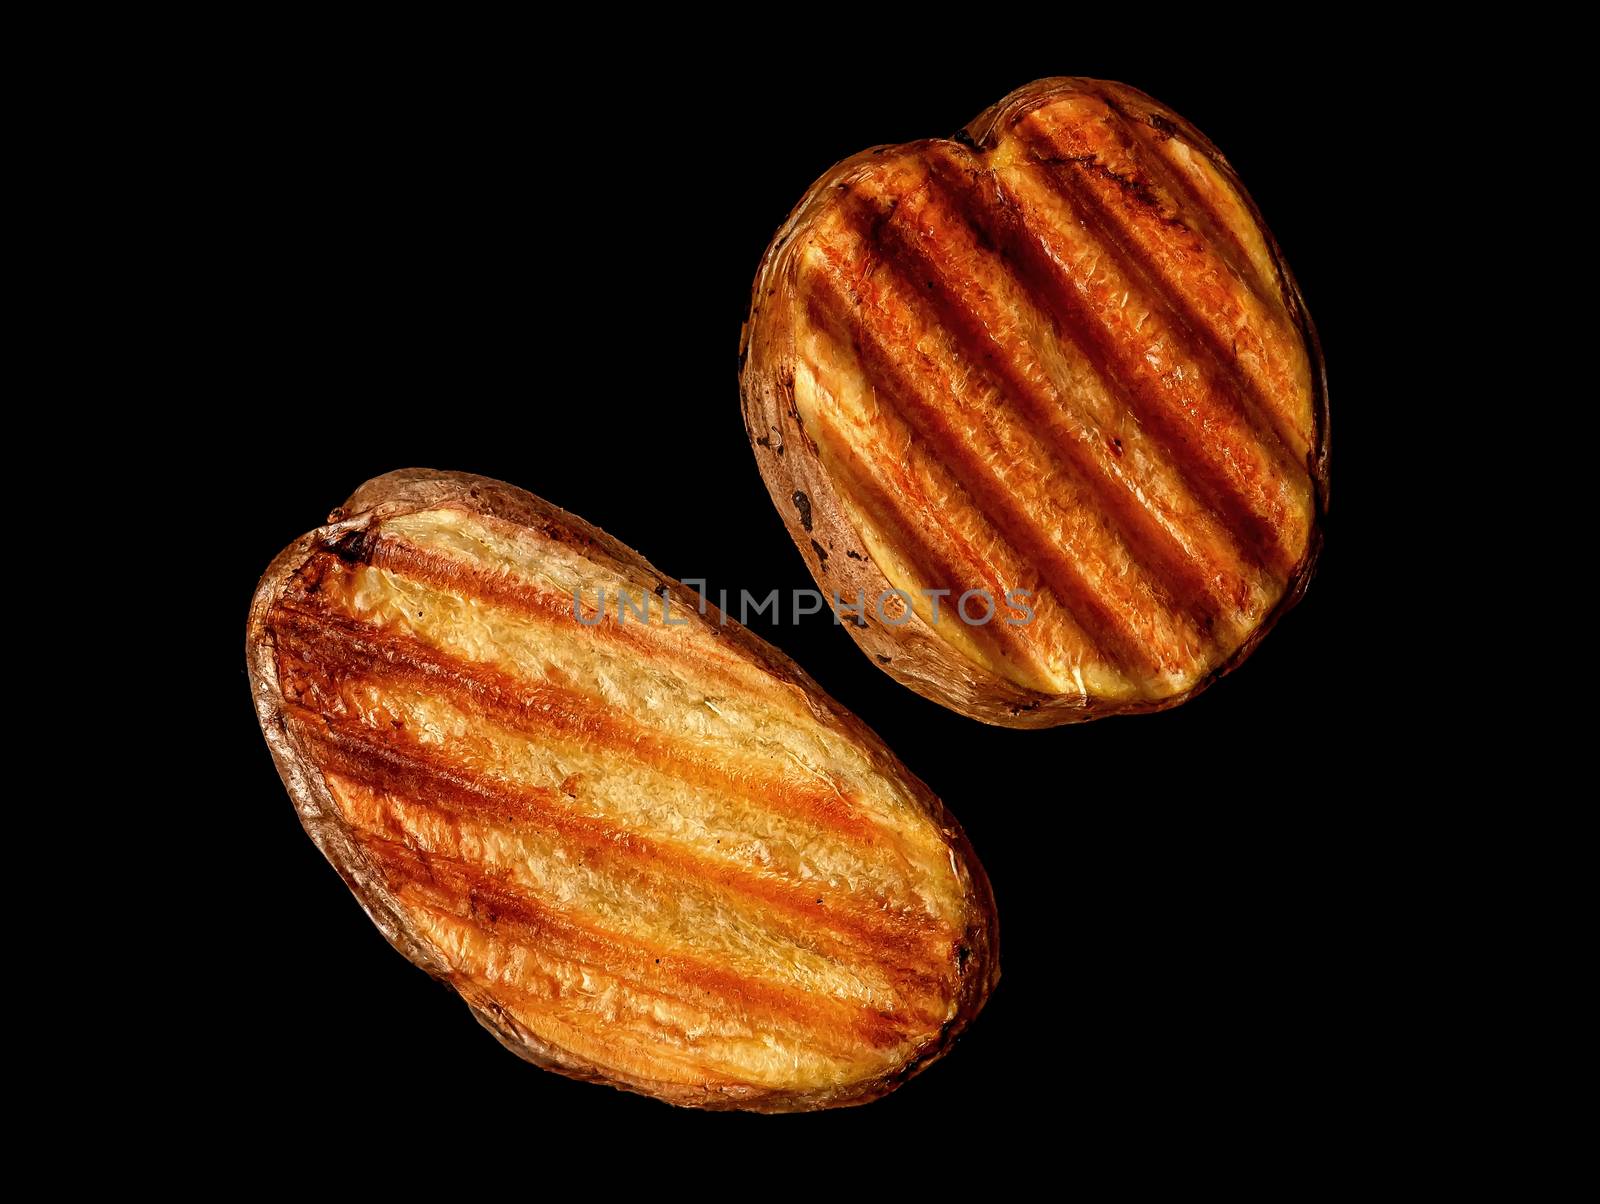 Two slices of grilled potatoes rotated on black background